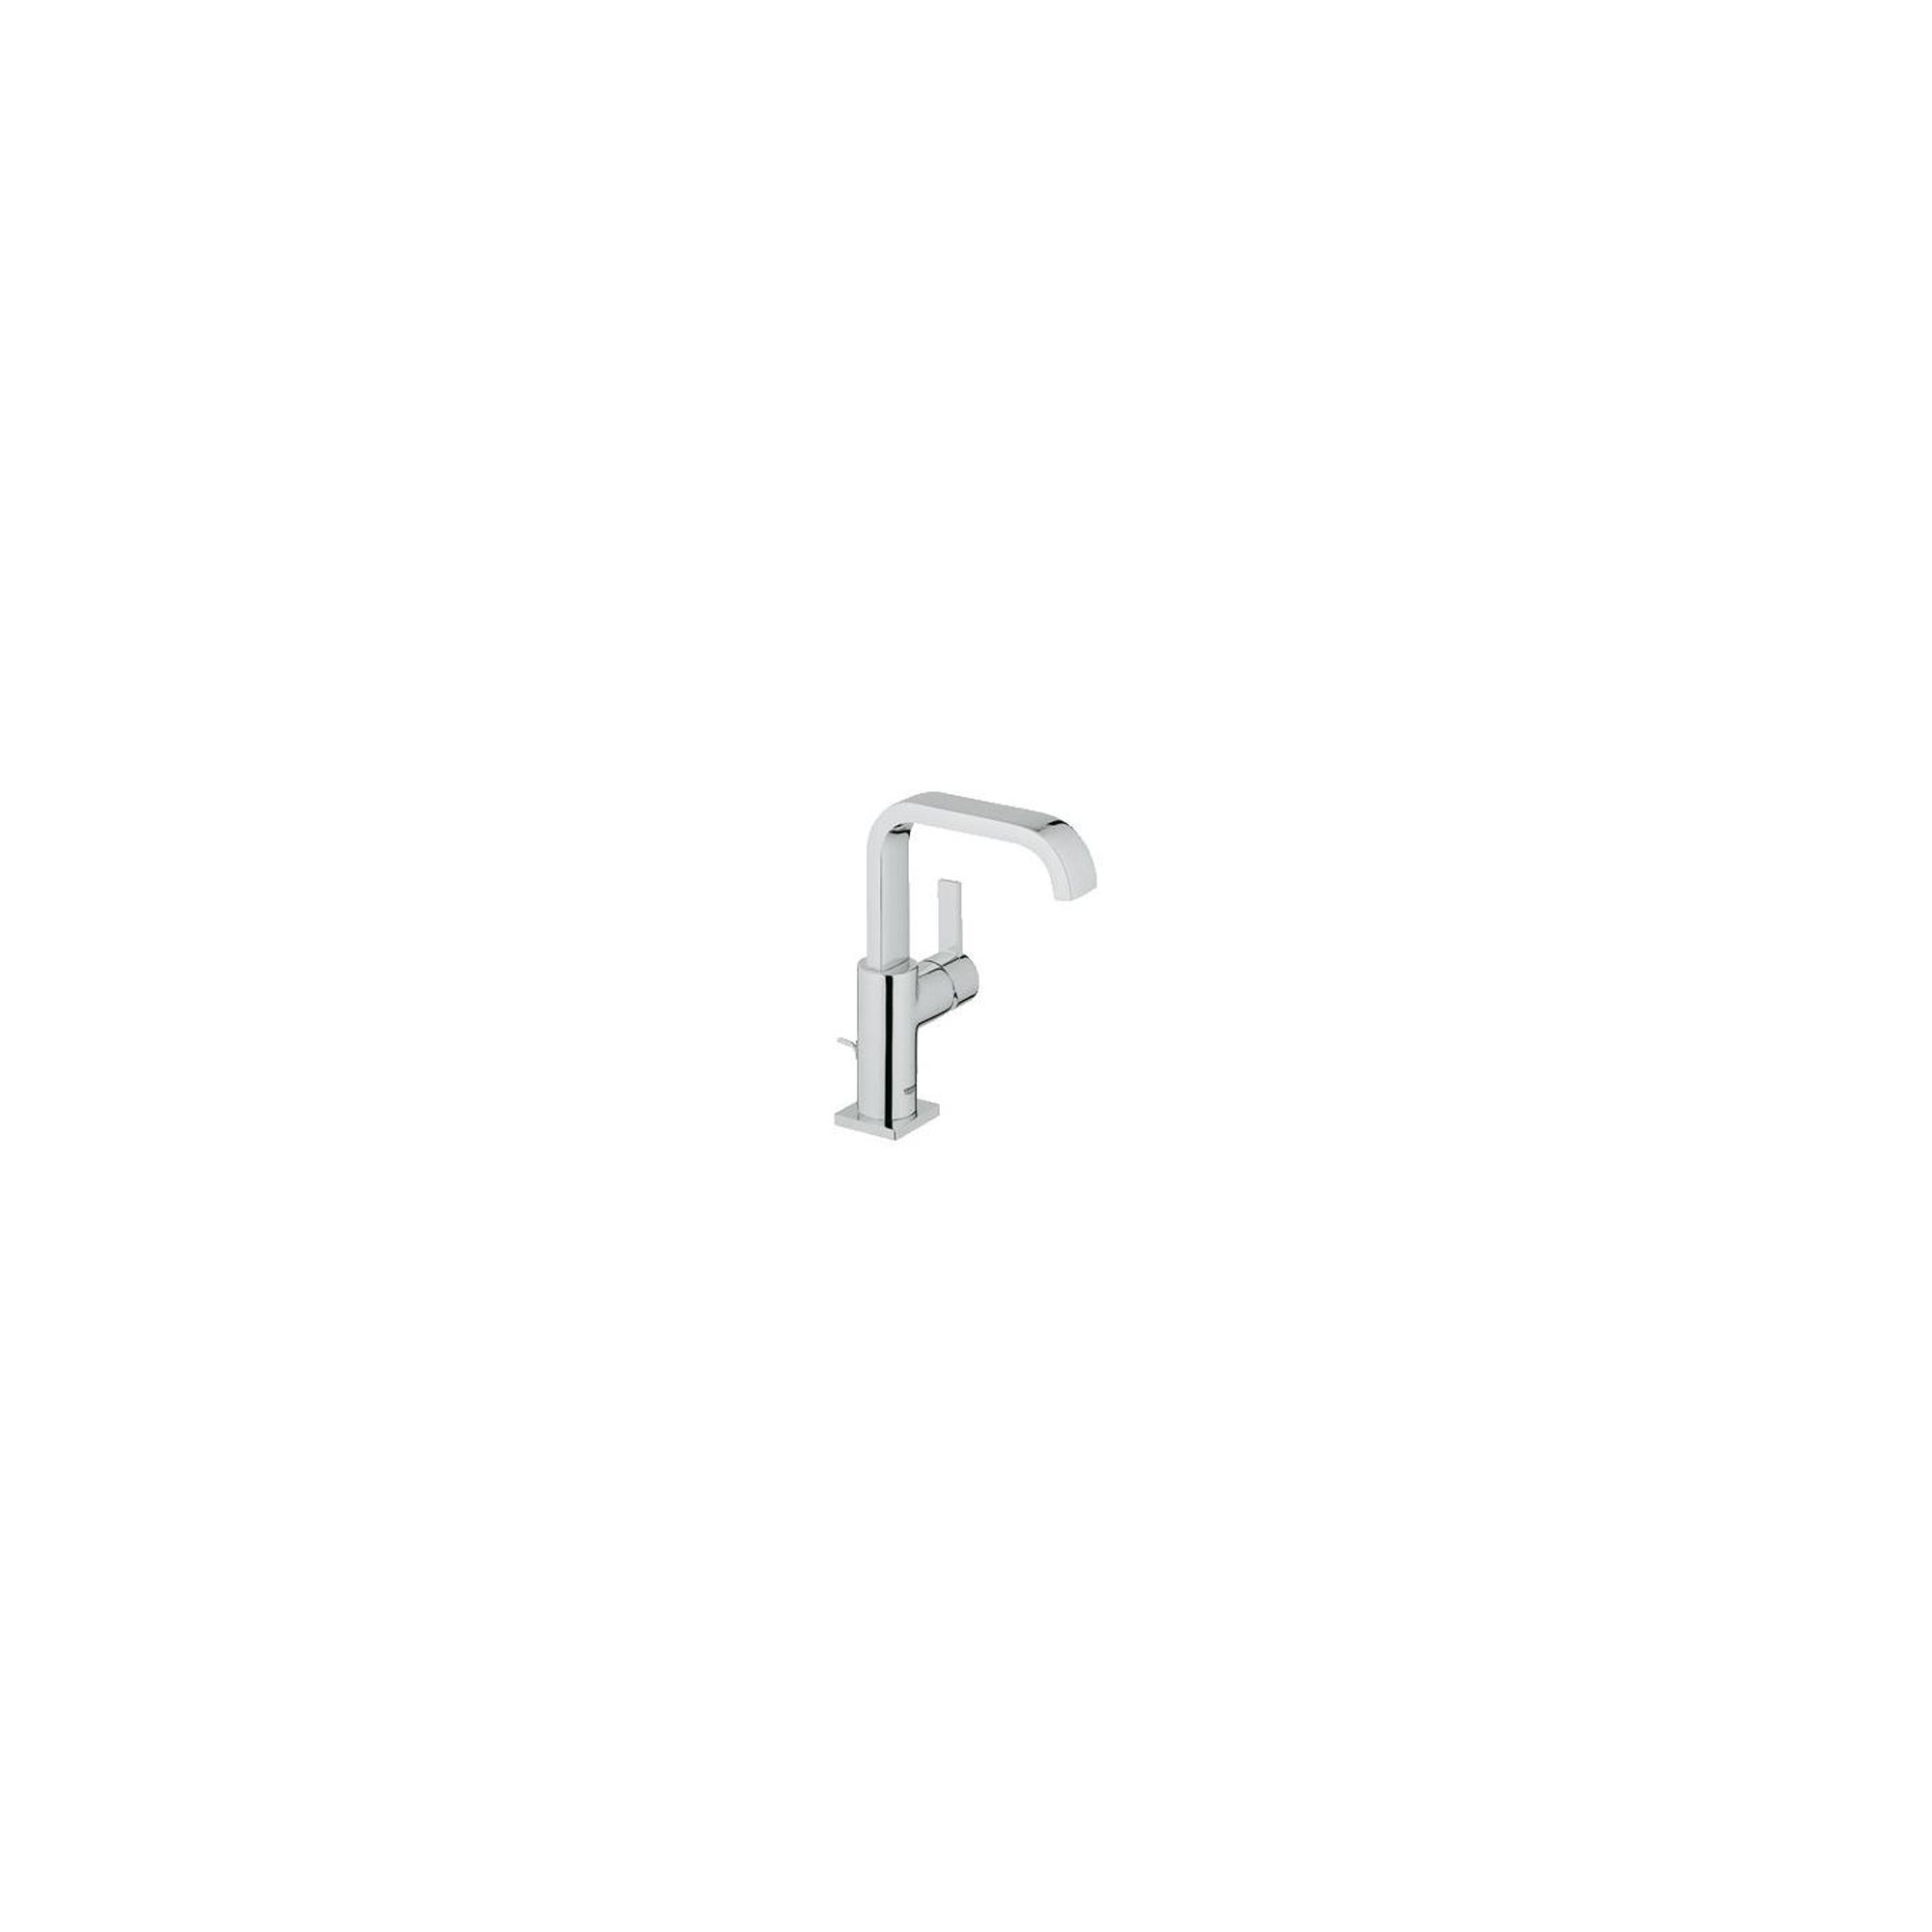 Grohe Allure Side Action Mono Basin Mixer Tap, Single Handle, Chrome at Tesco Direct